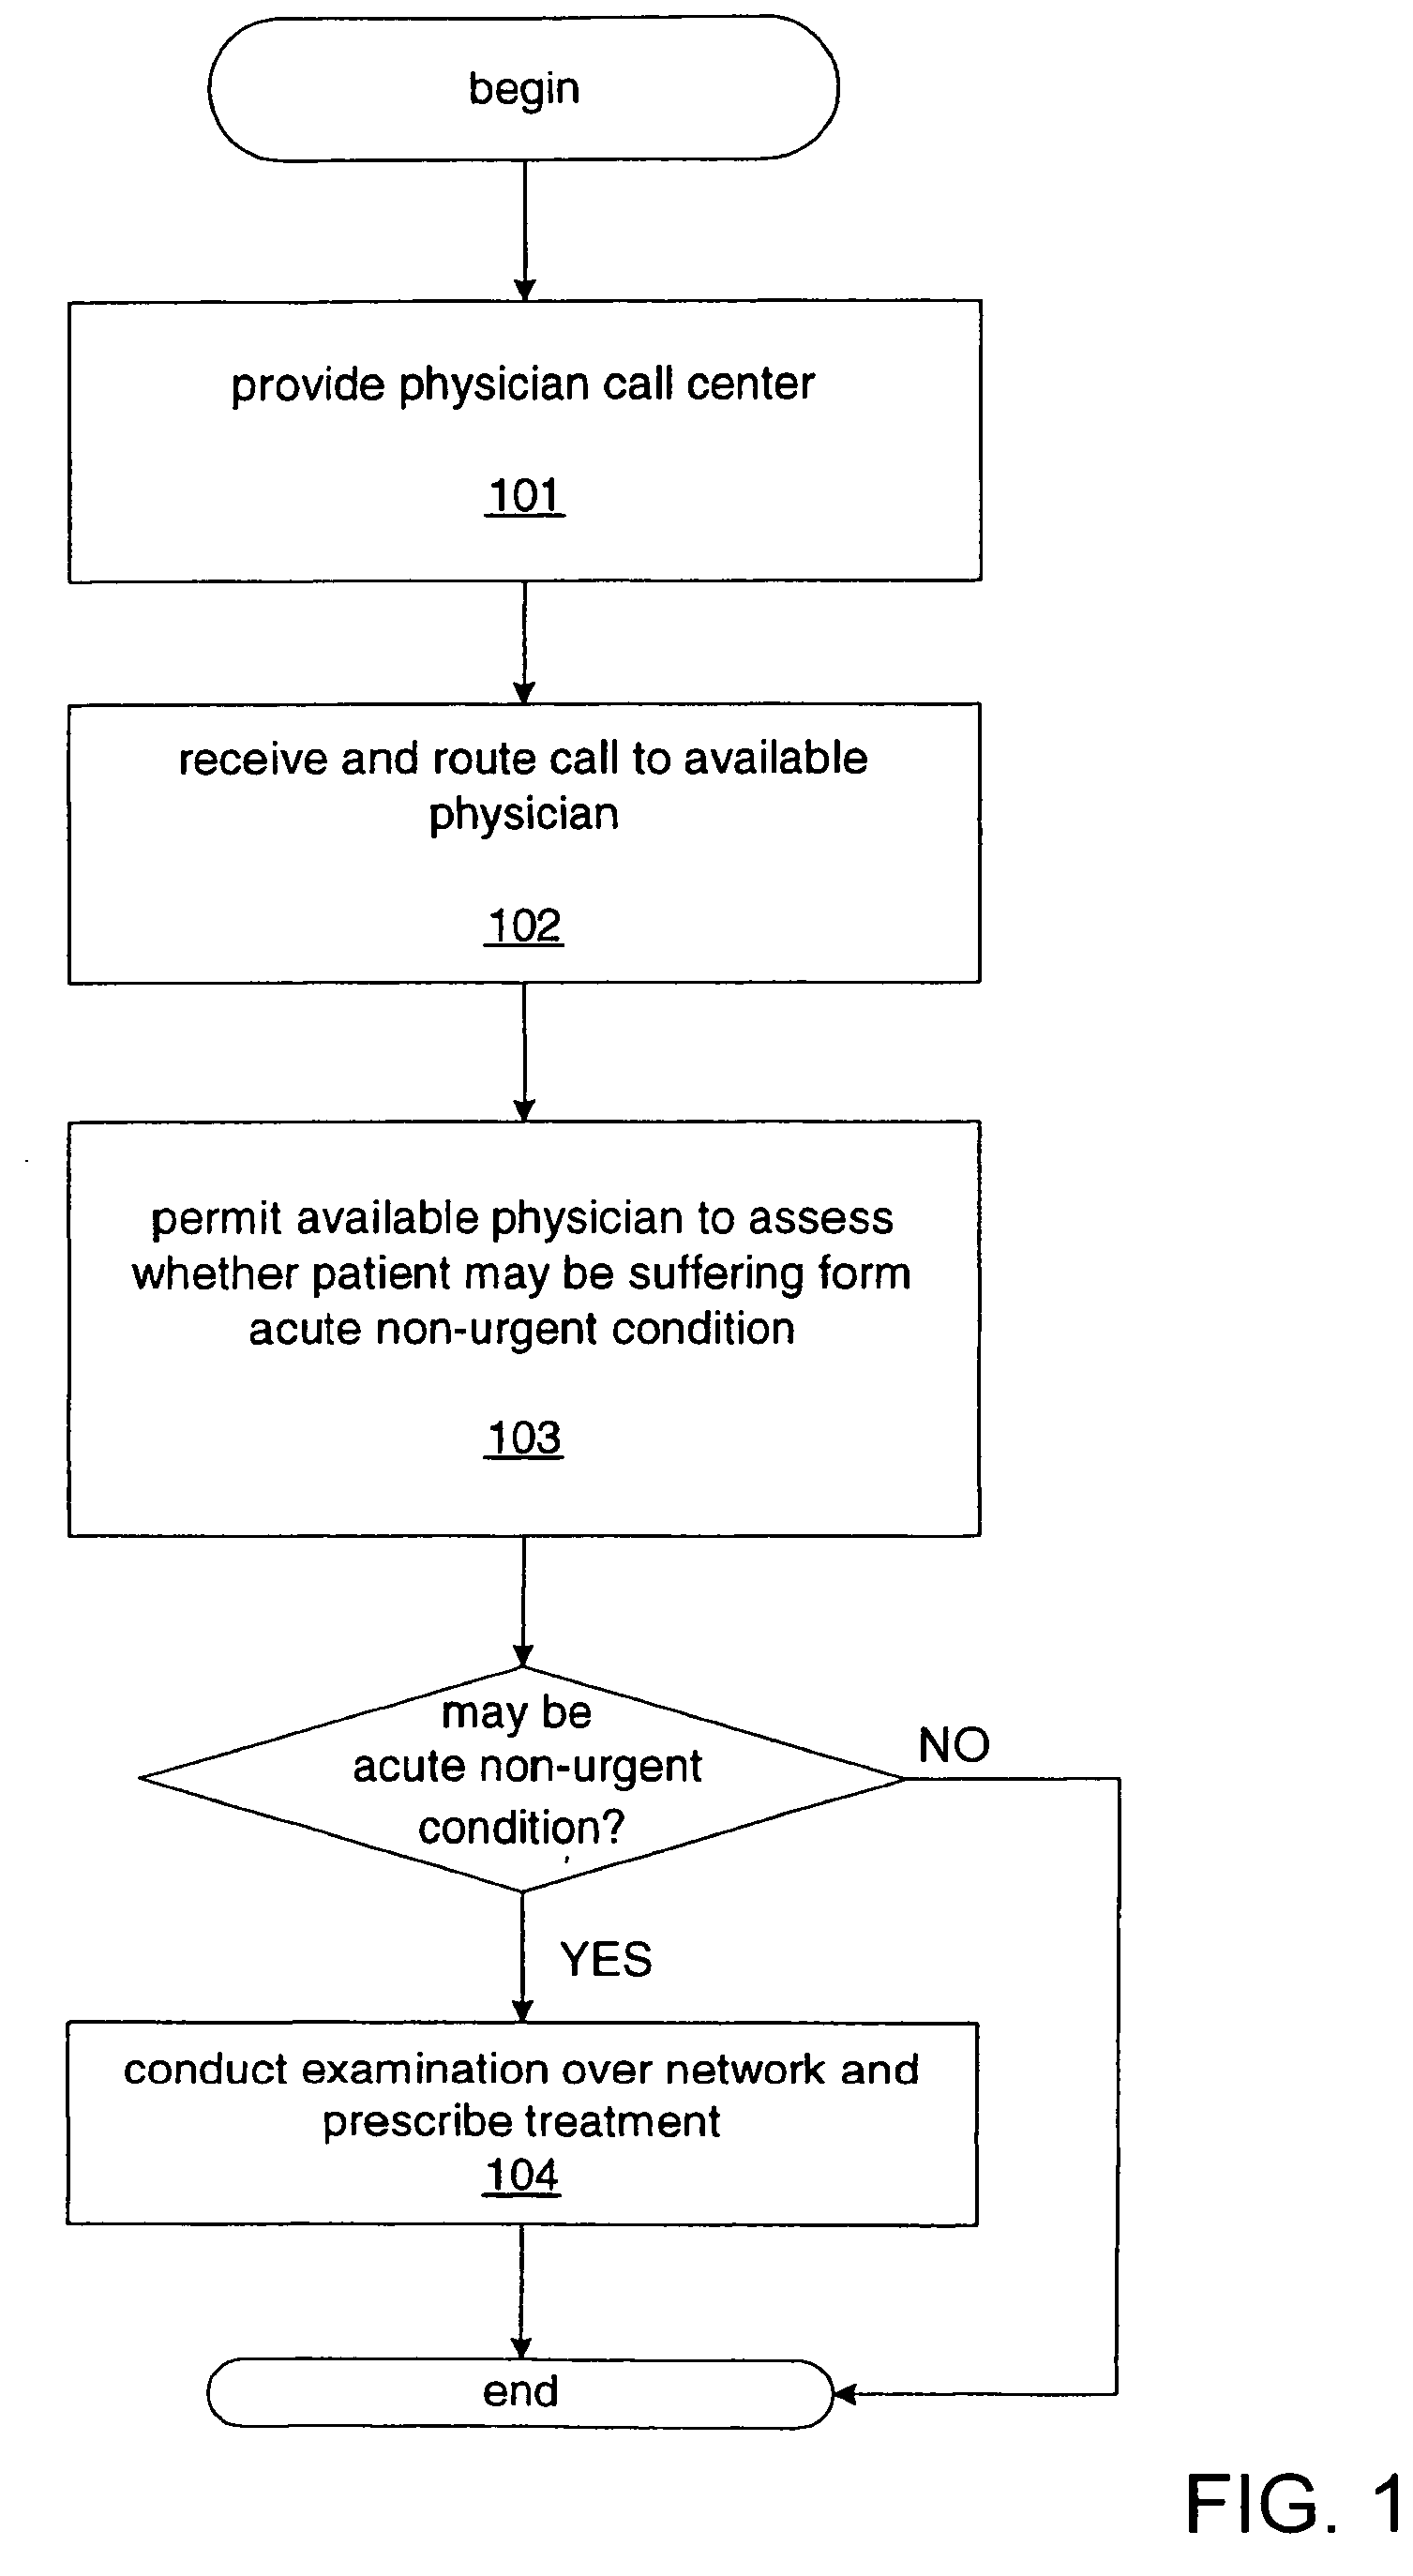 System and method for delivering medical examination, treatment and assistance over a network